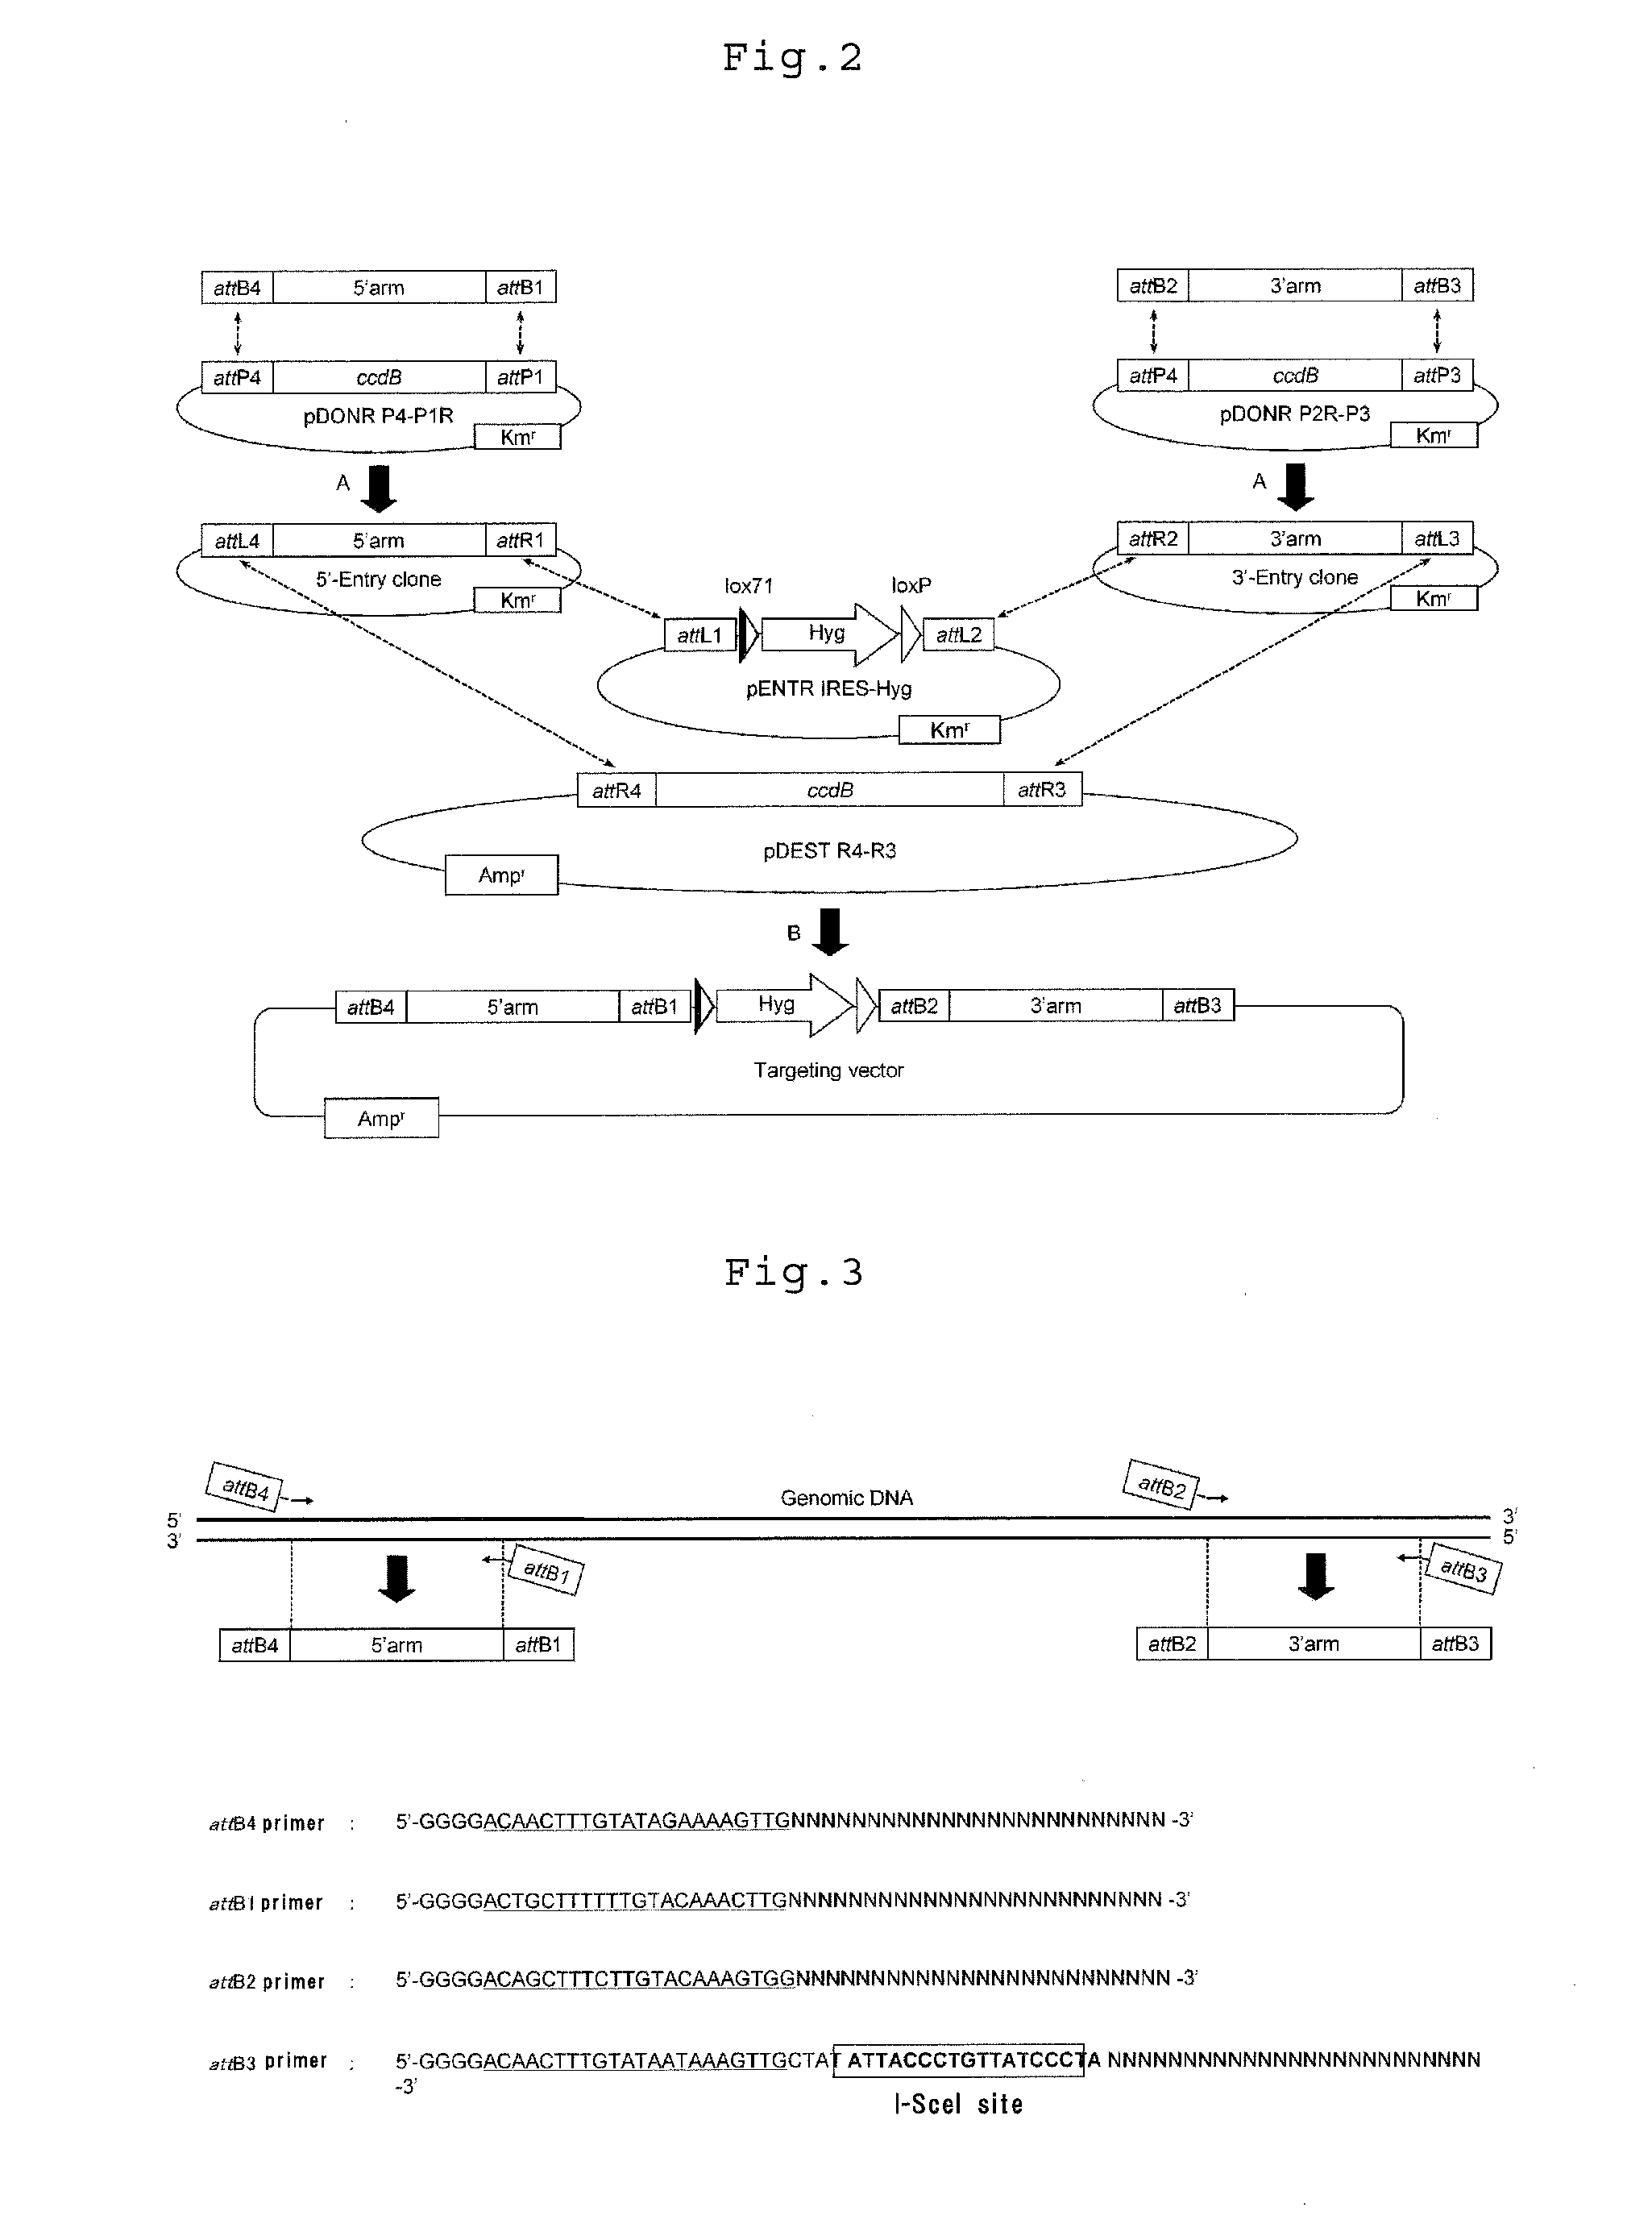 Gene targeting vector, method for manufacturing same, and method for using same